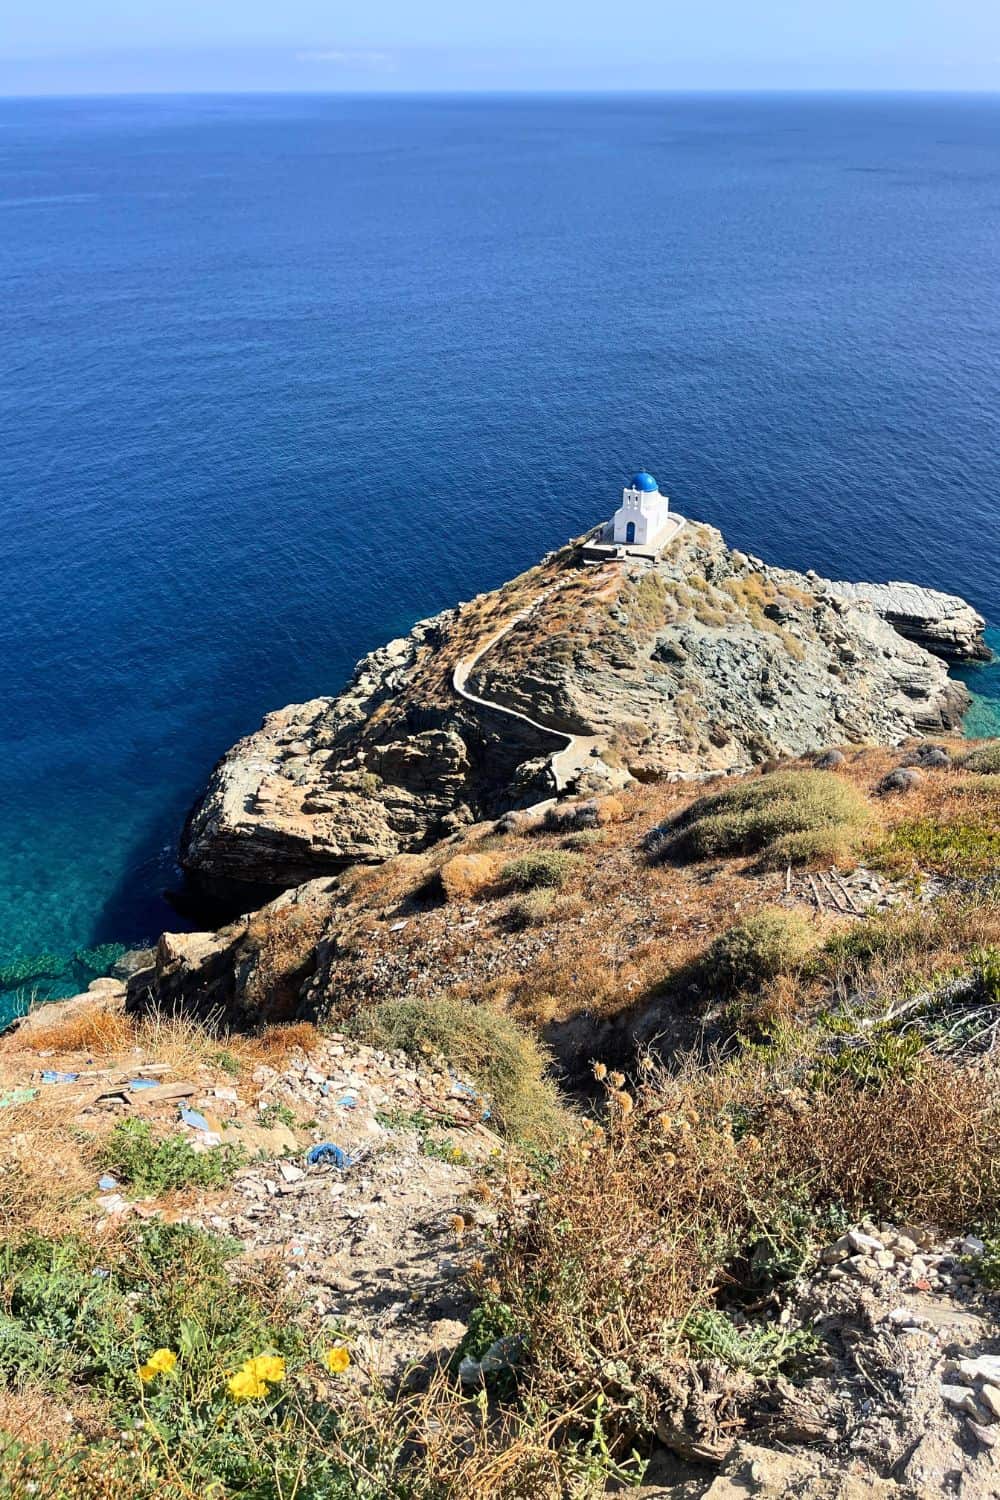 A traditional Greek chapel with a blue dome stands alone on a rocky outcrop overlooking the deep blue sea in Sifnos, Greece